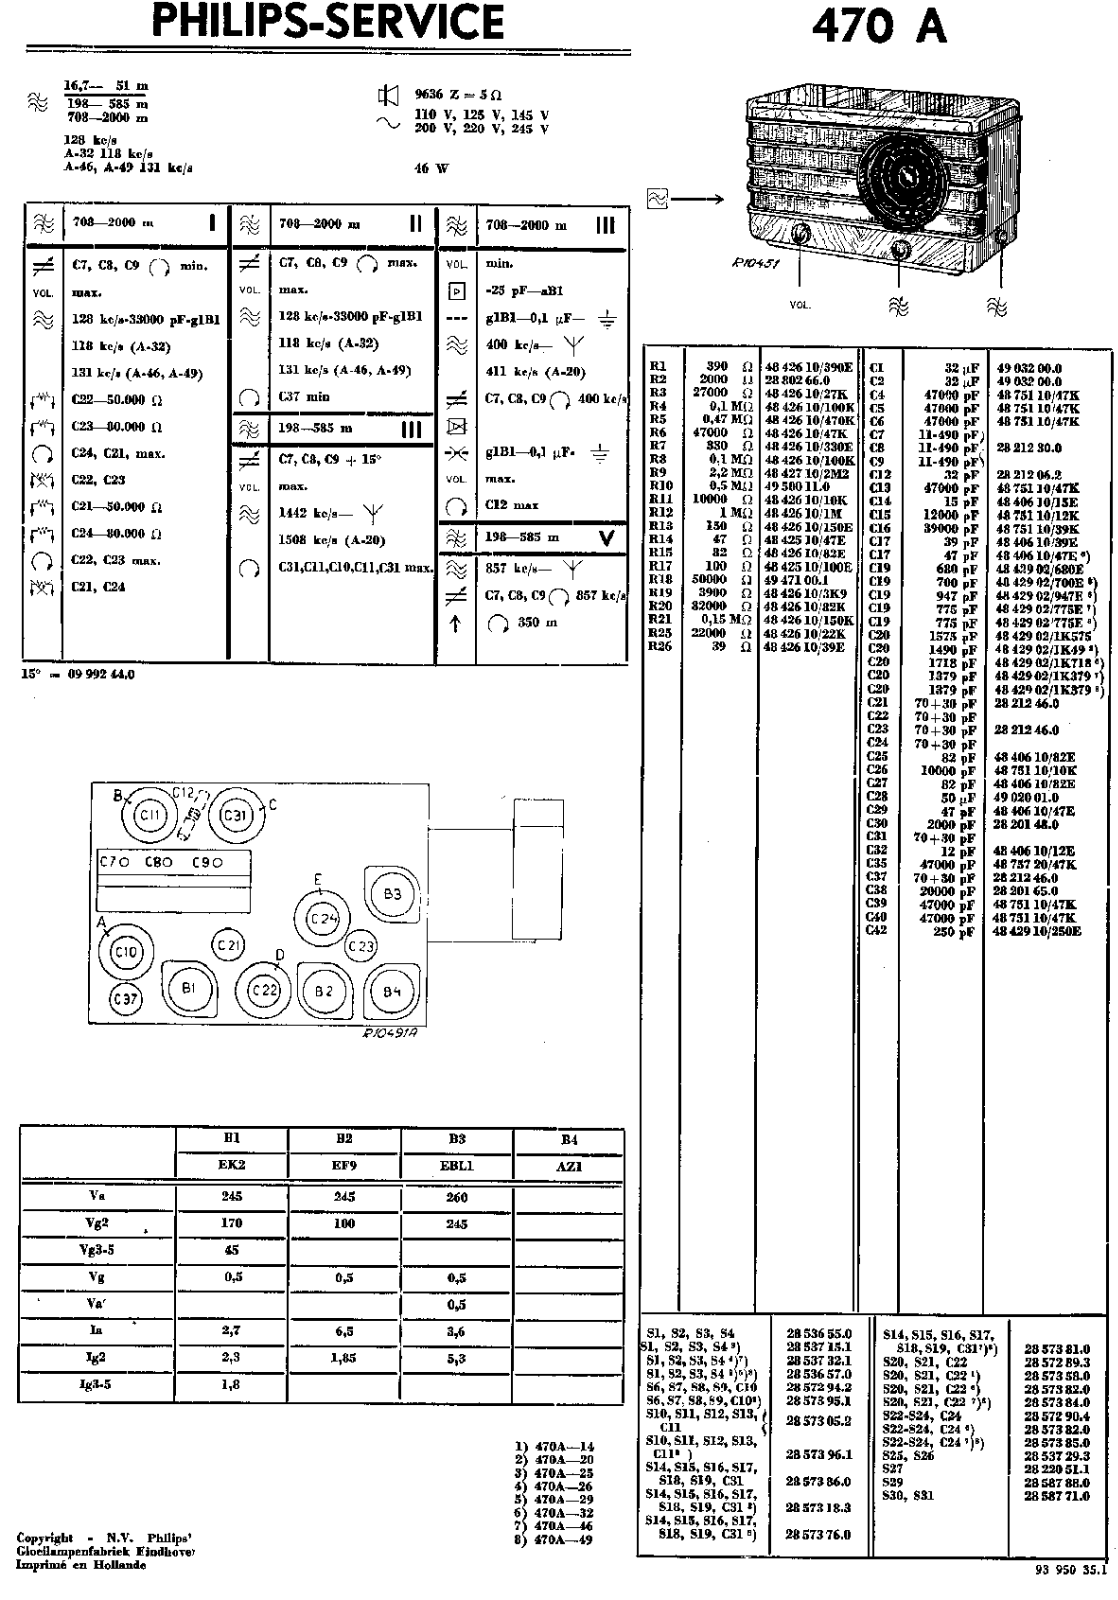 Philips 470-A Service Manual